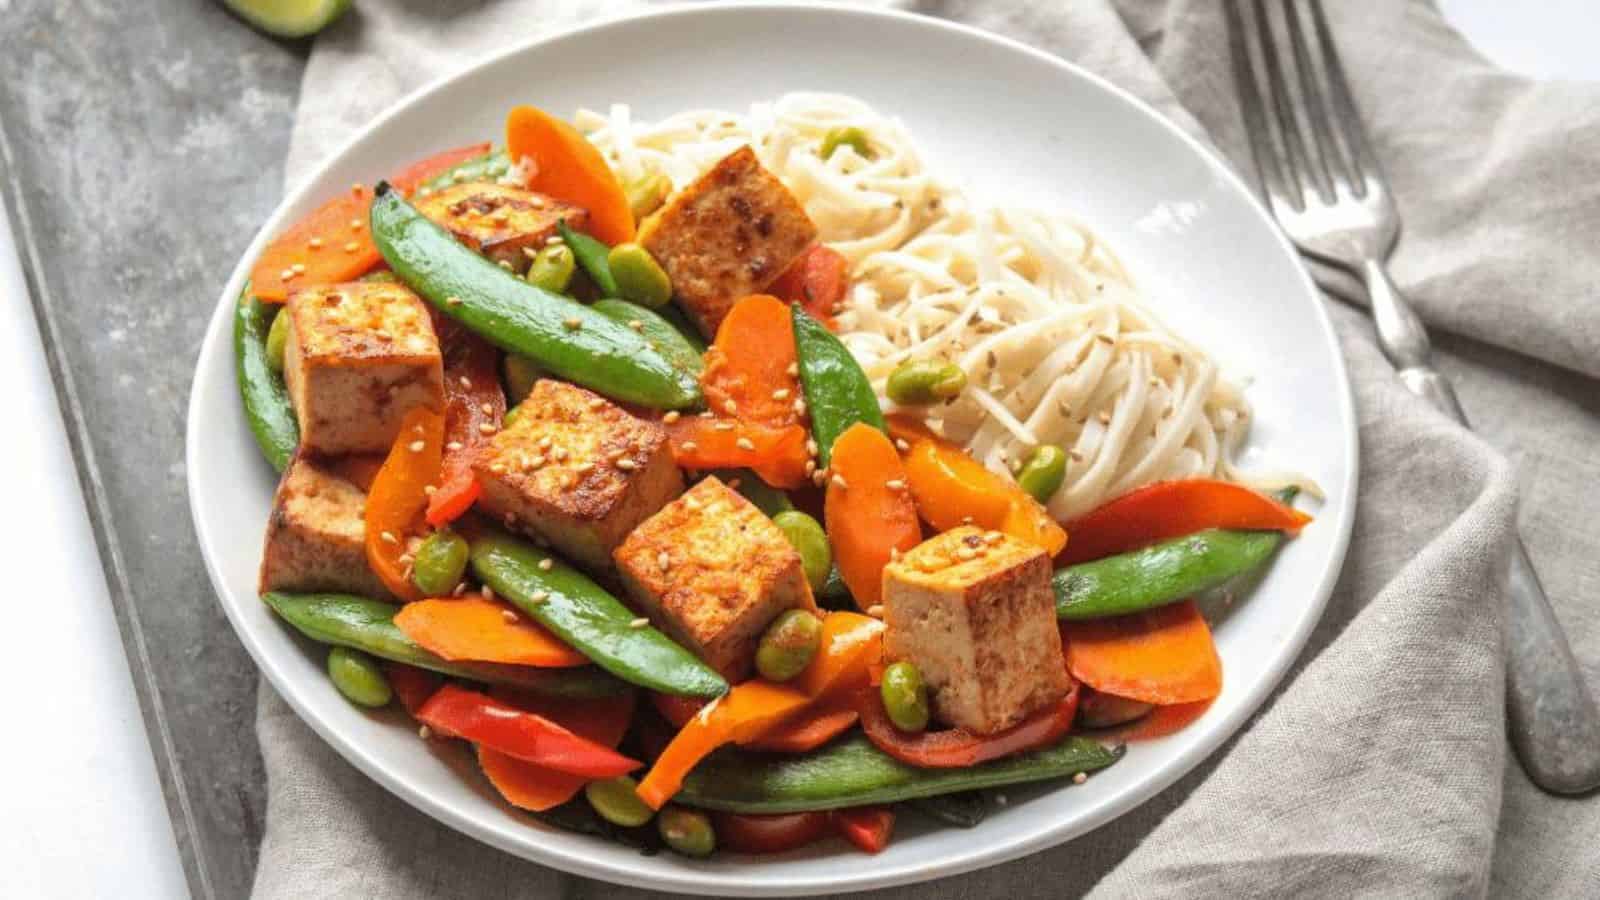 Seared tofu with roasted carrots, edamame, and bell peppers next to rice noodles on a white plate.